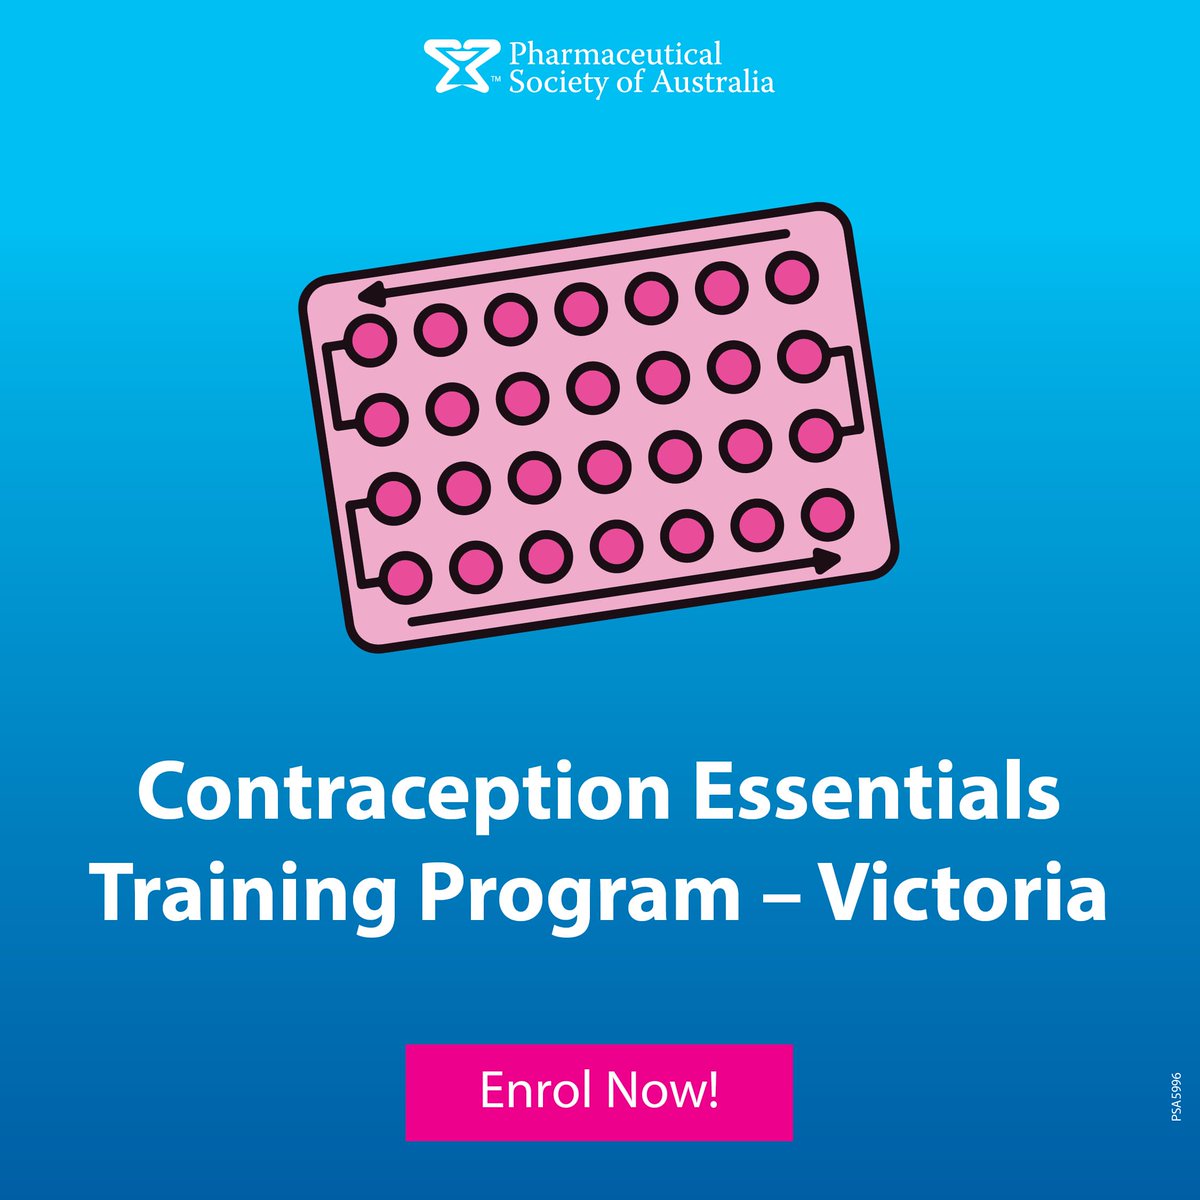 Pharmacists in Victoria can now enhance their expertise in contraception counselling. This course covers reproductive hormones, various contraceptive methods, and clinical decision-making, fostering patient-centered care loom.ly/upe97qU